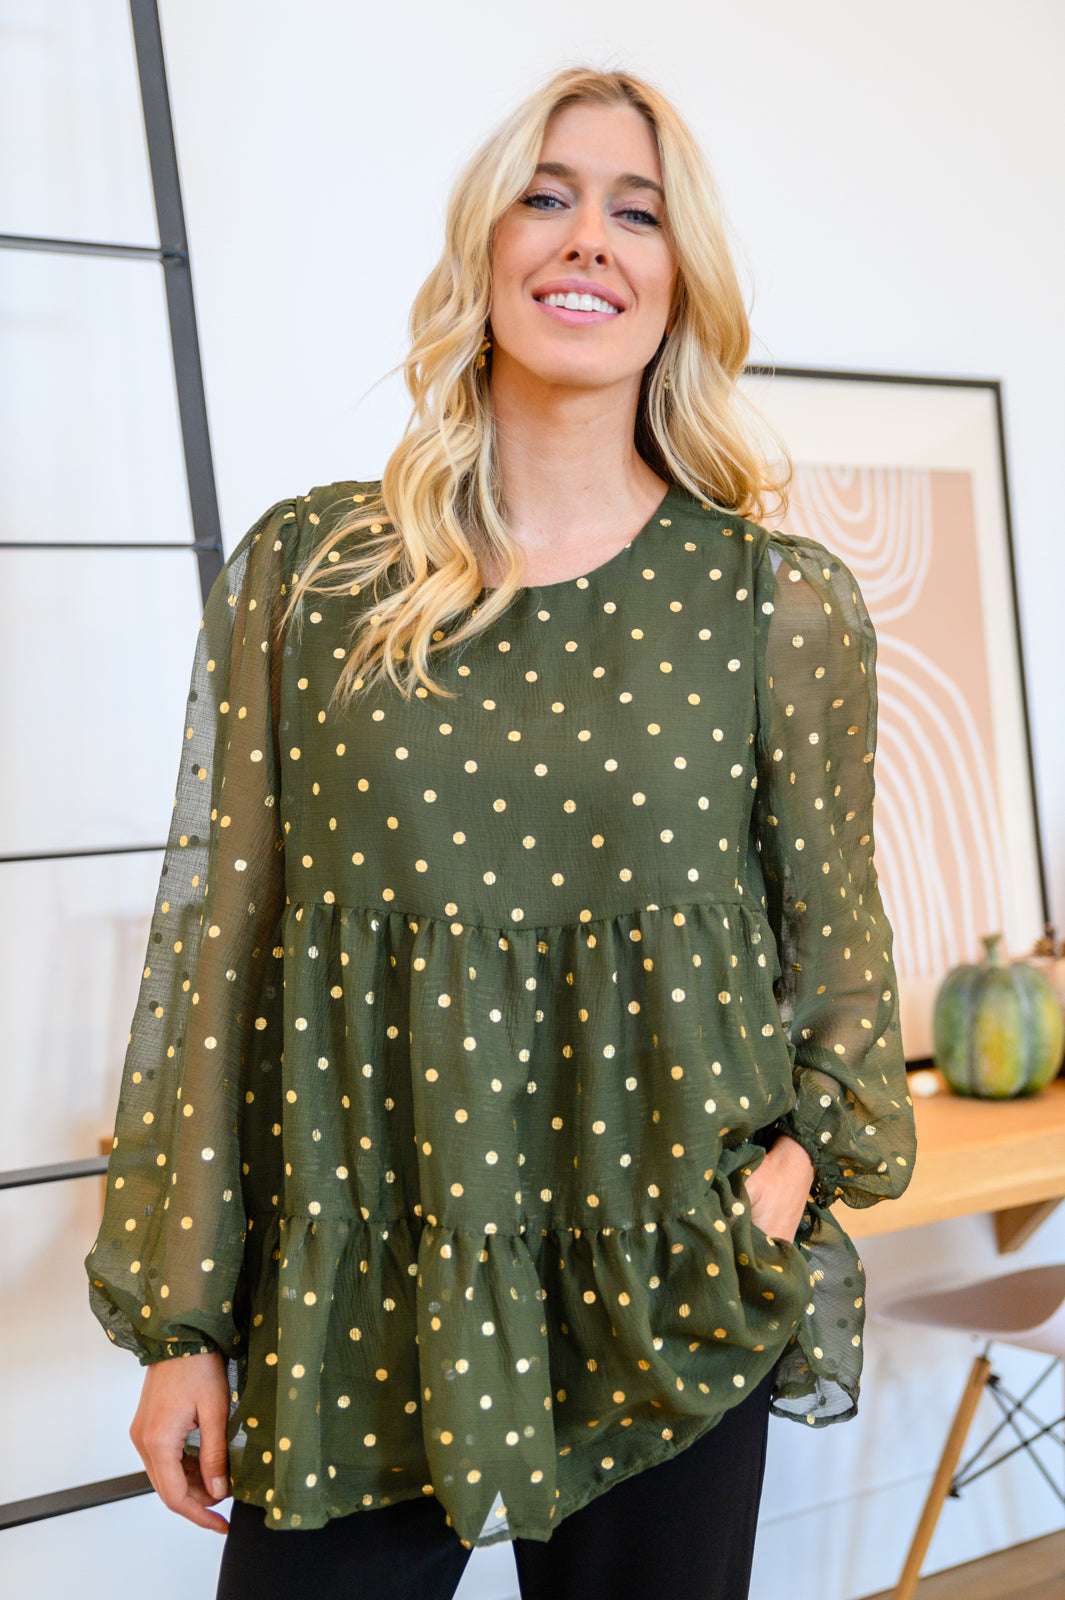 Coya Metallic Dot Tiered Blouse in Olive - 12/1/2022